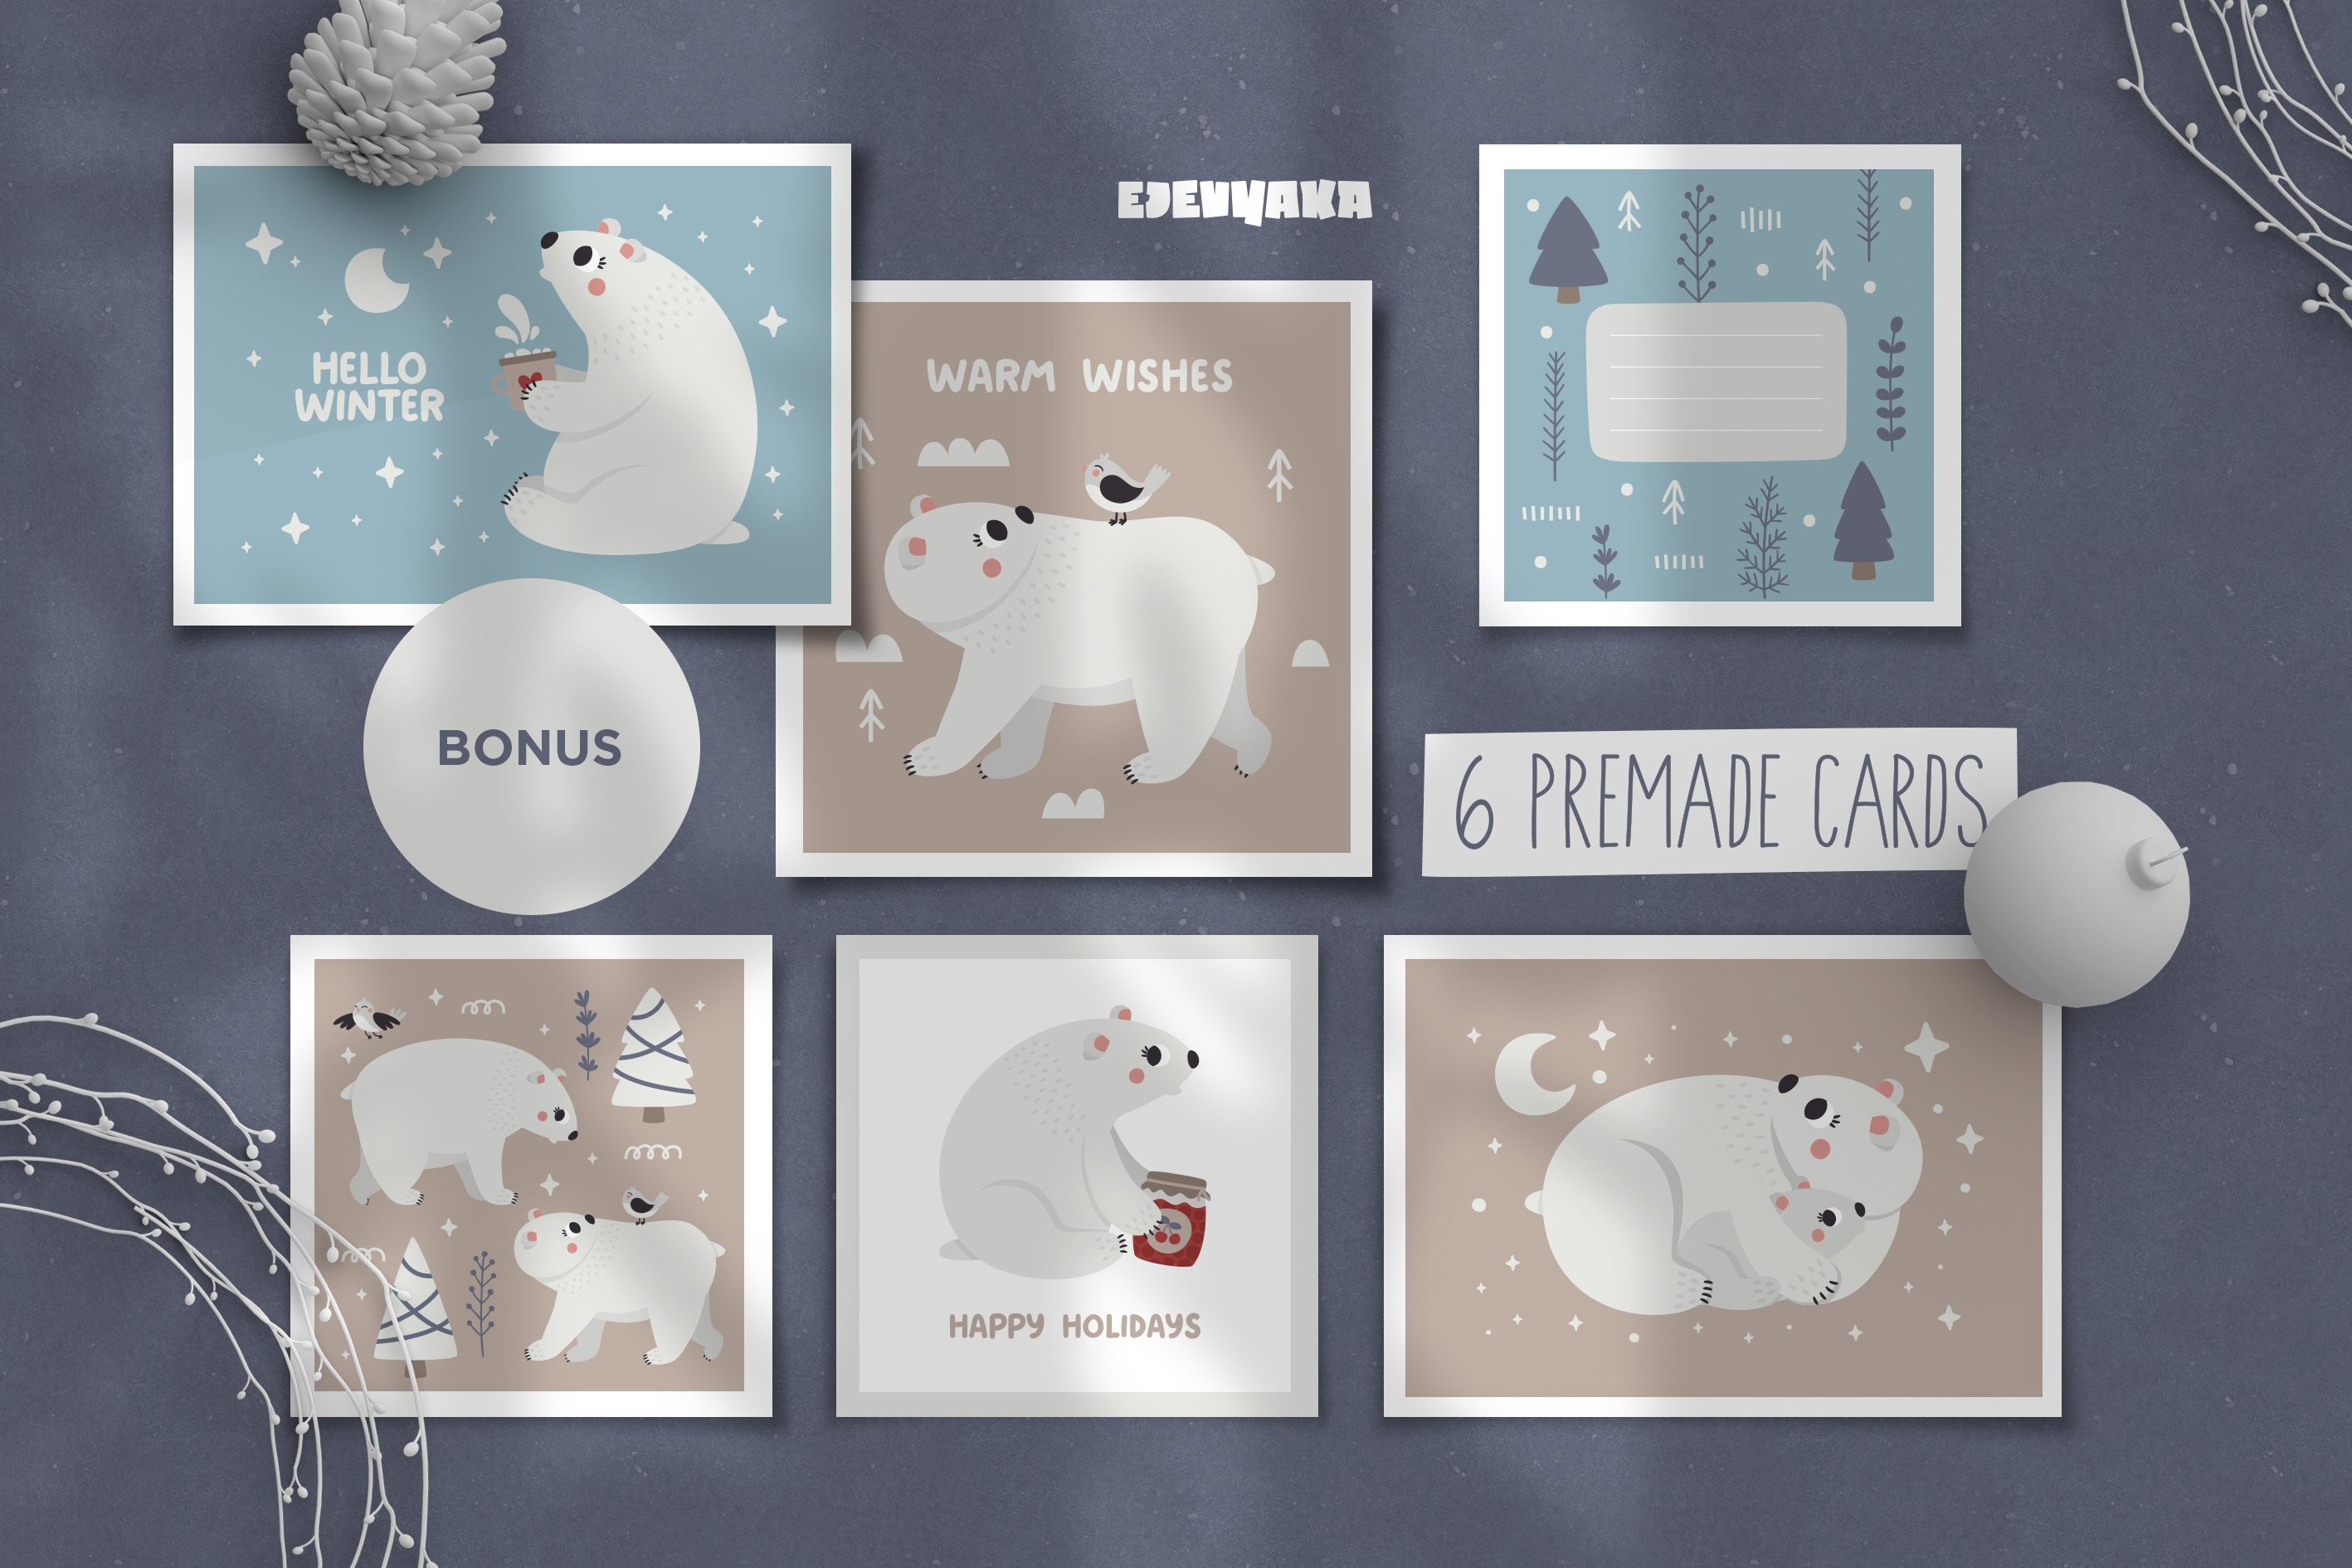 Some greetings cards with polar bears.